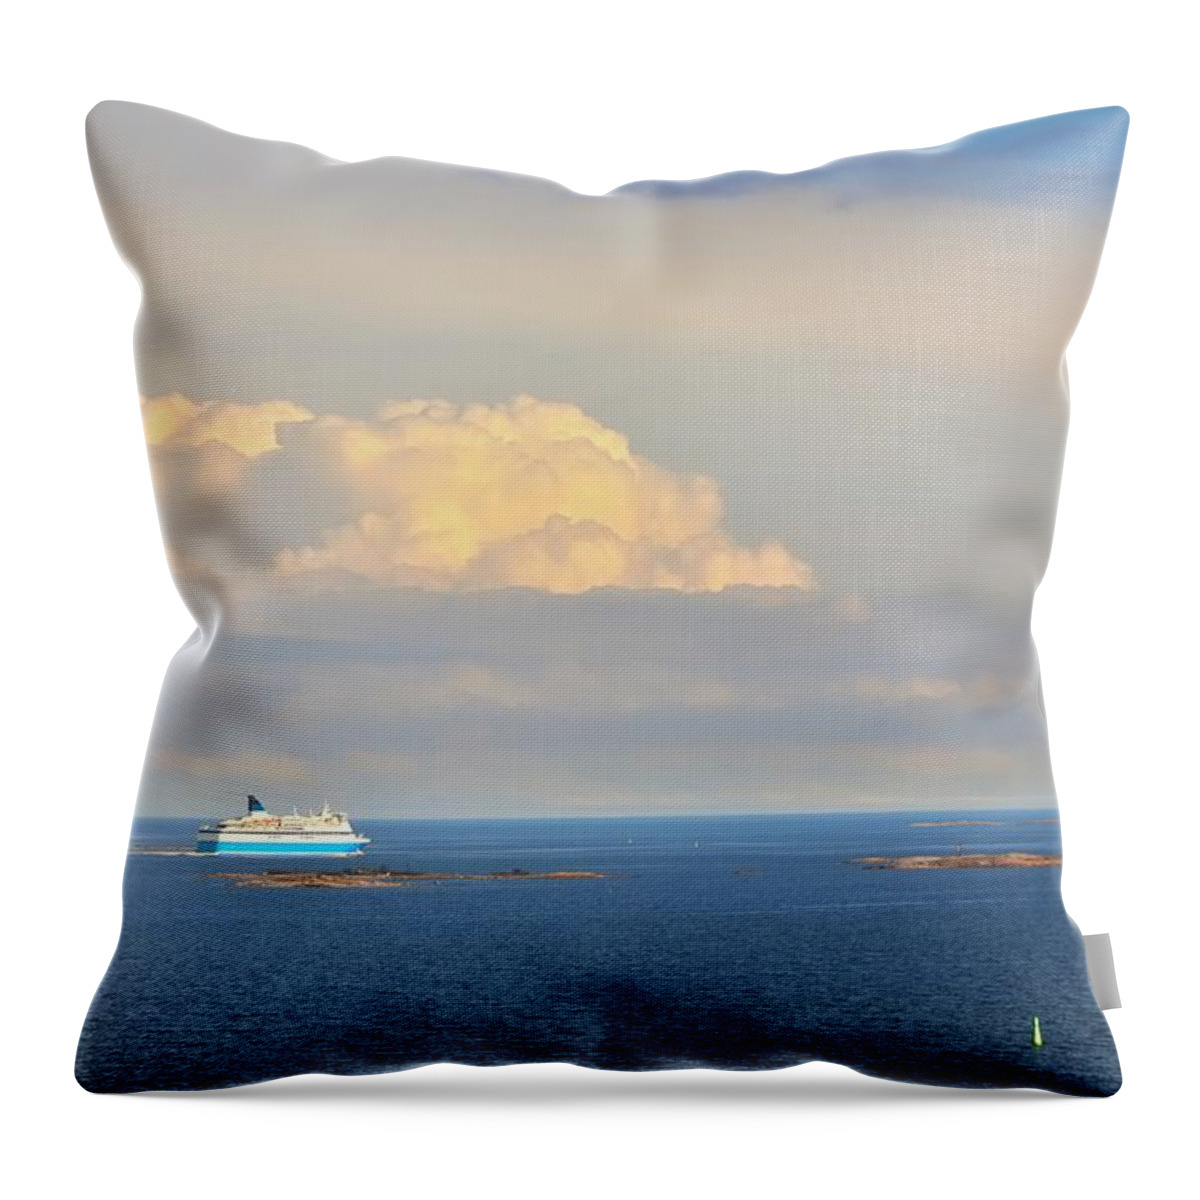 Baltic Sea Throw Pillow featuring the photograph Helsinki Cruise Ship Setting Out by Joesboy